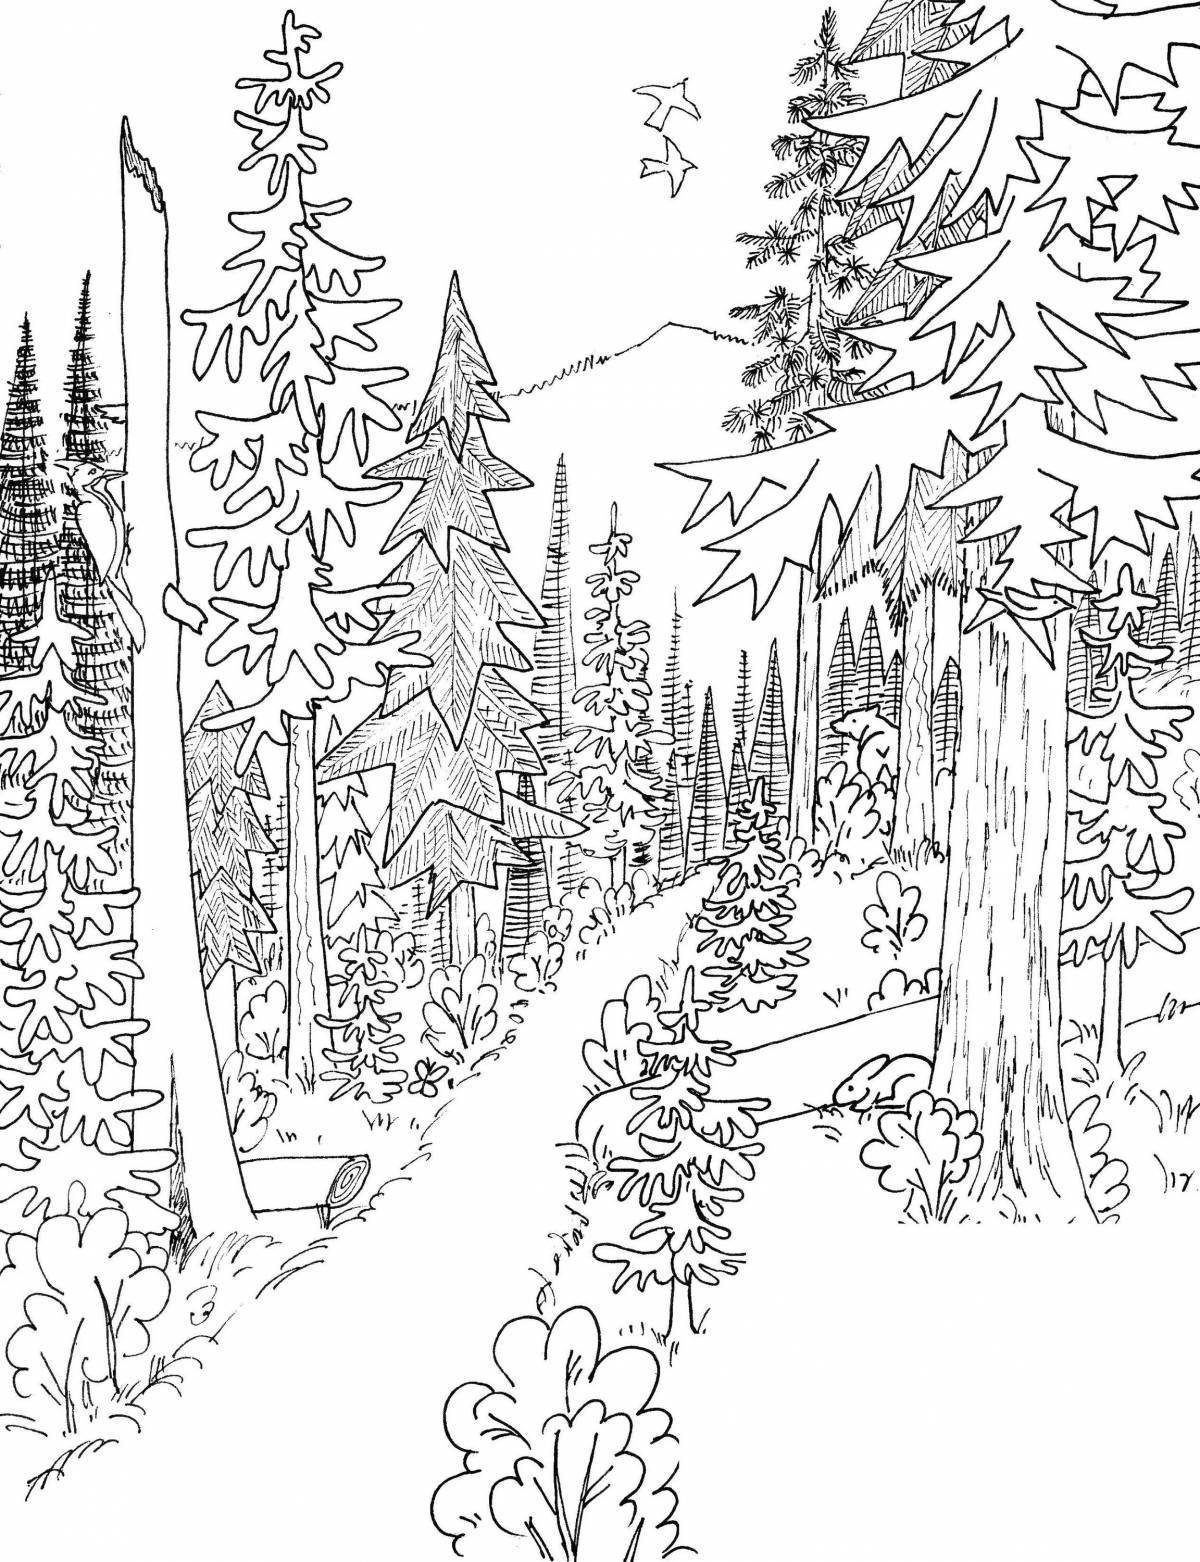 Awesome pine forest coloring page